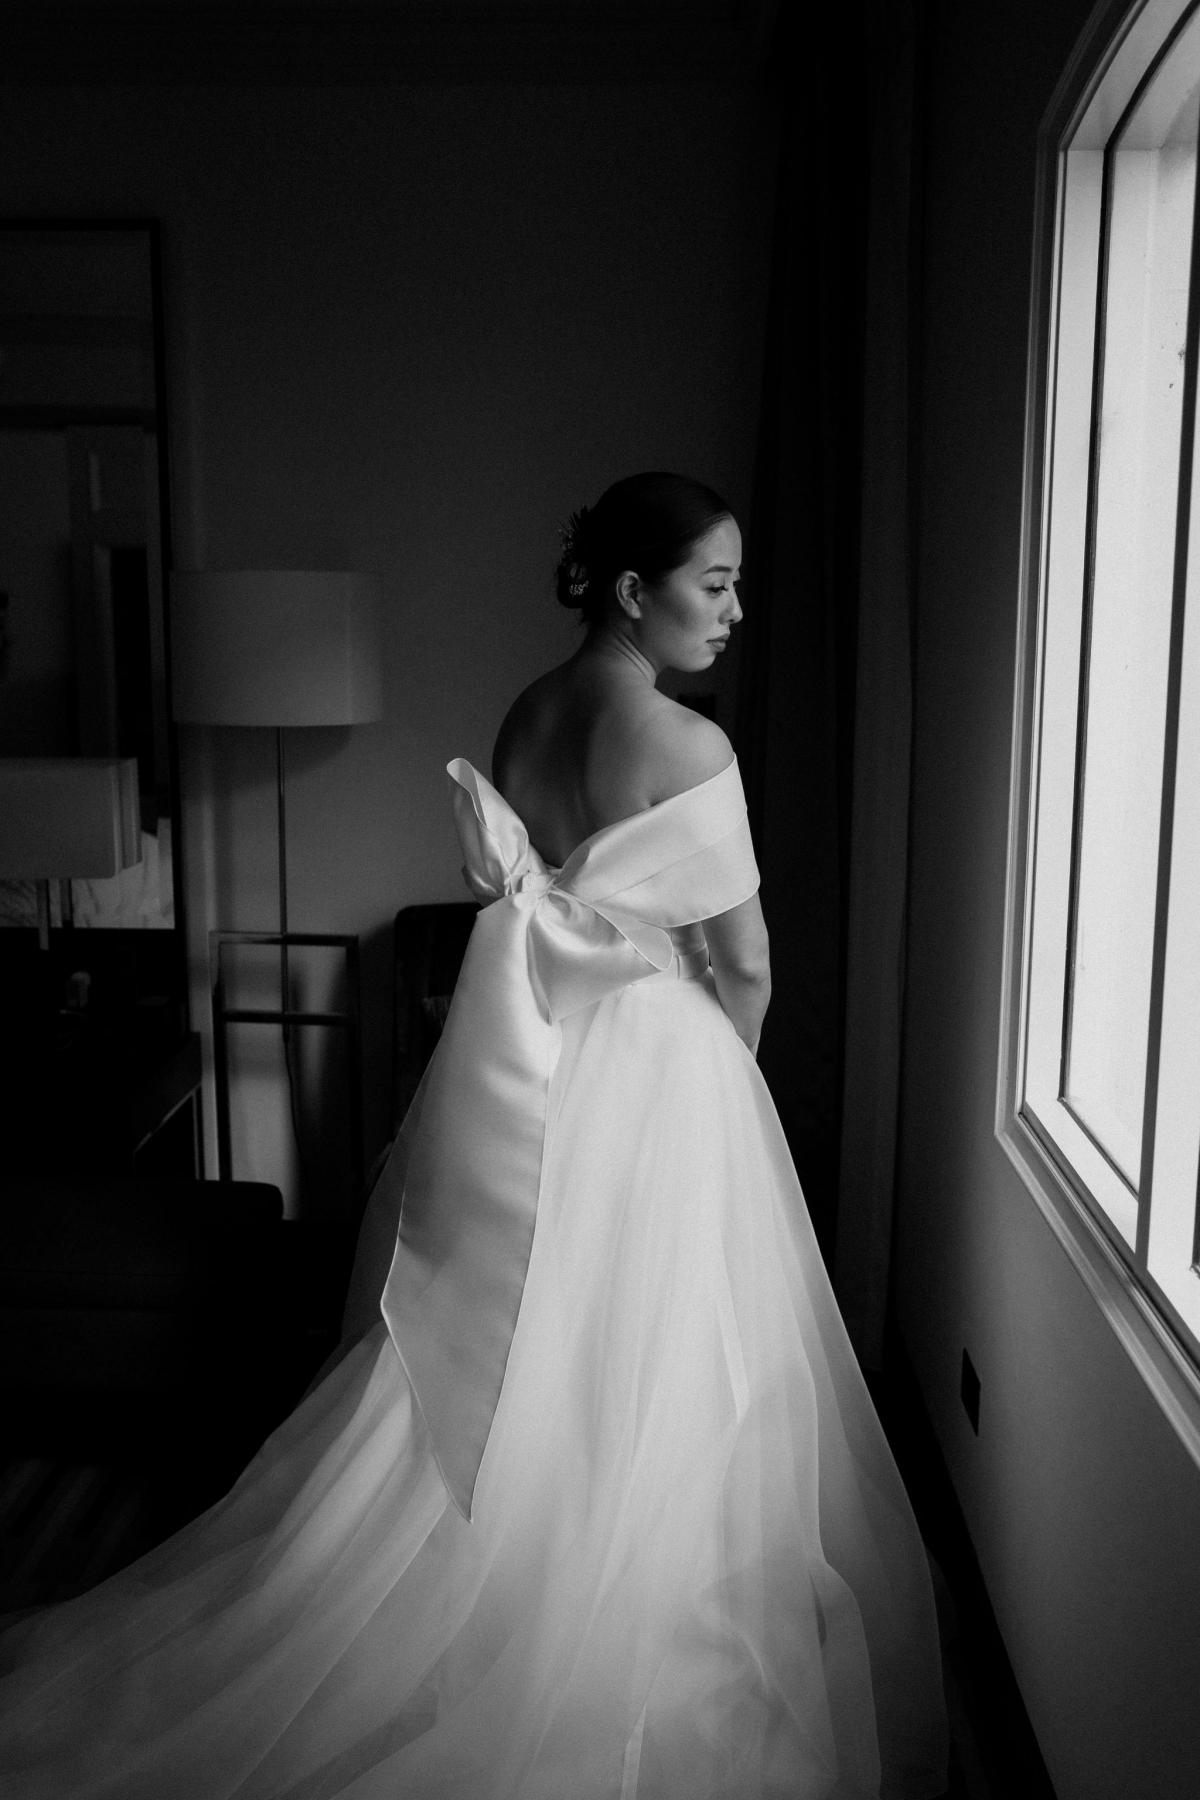 KWH real bride Sarah standing by the window light in her Kitty Joni gown with Twill sash around her sholders.